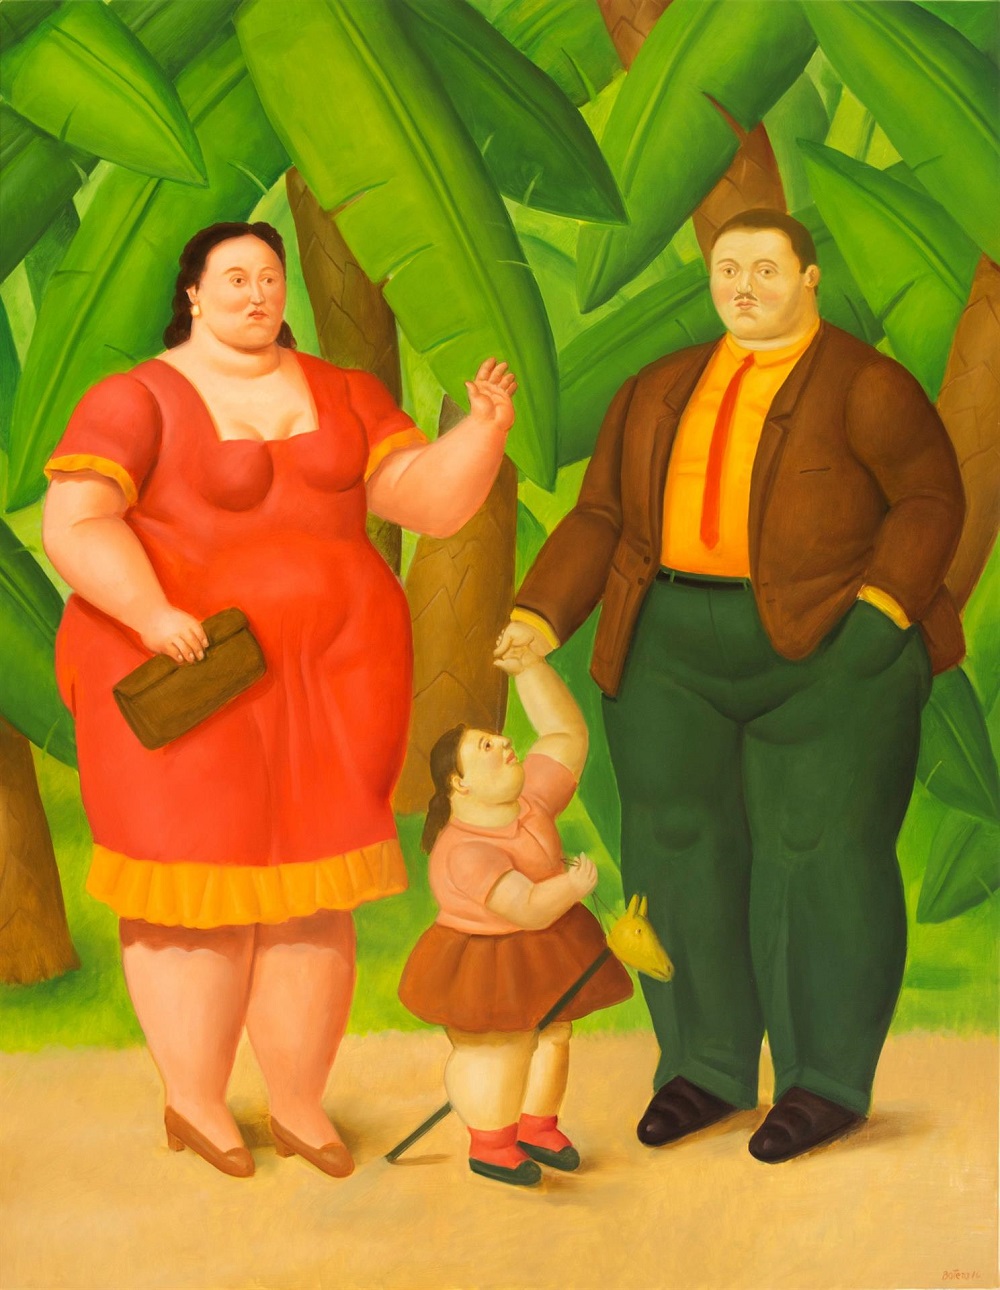 Anthology of Botero's work with music by Emilio Estefan exhibited in Miami